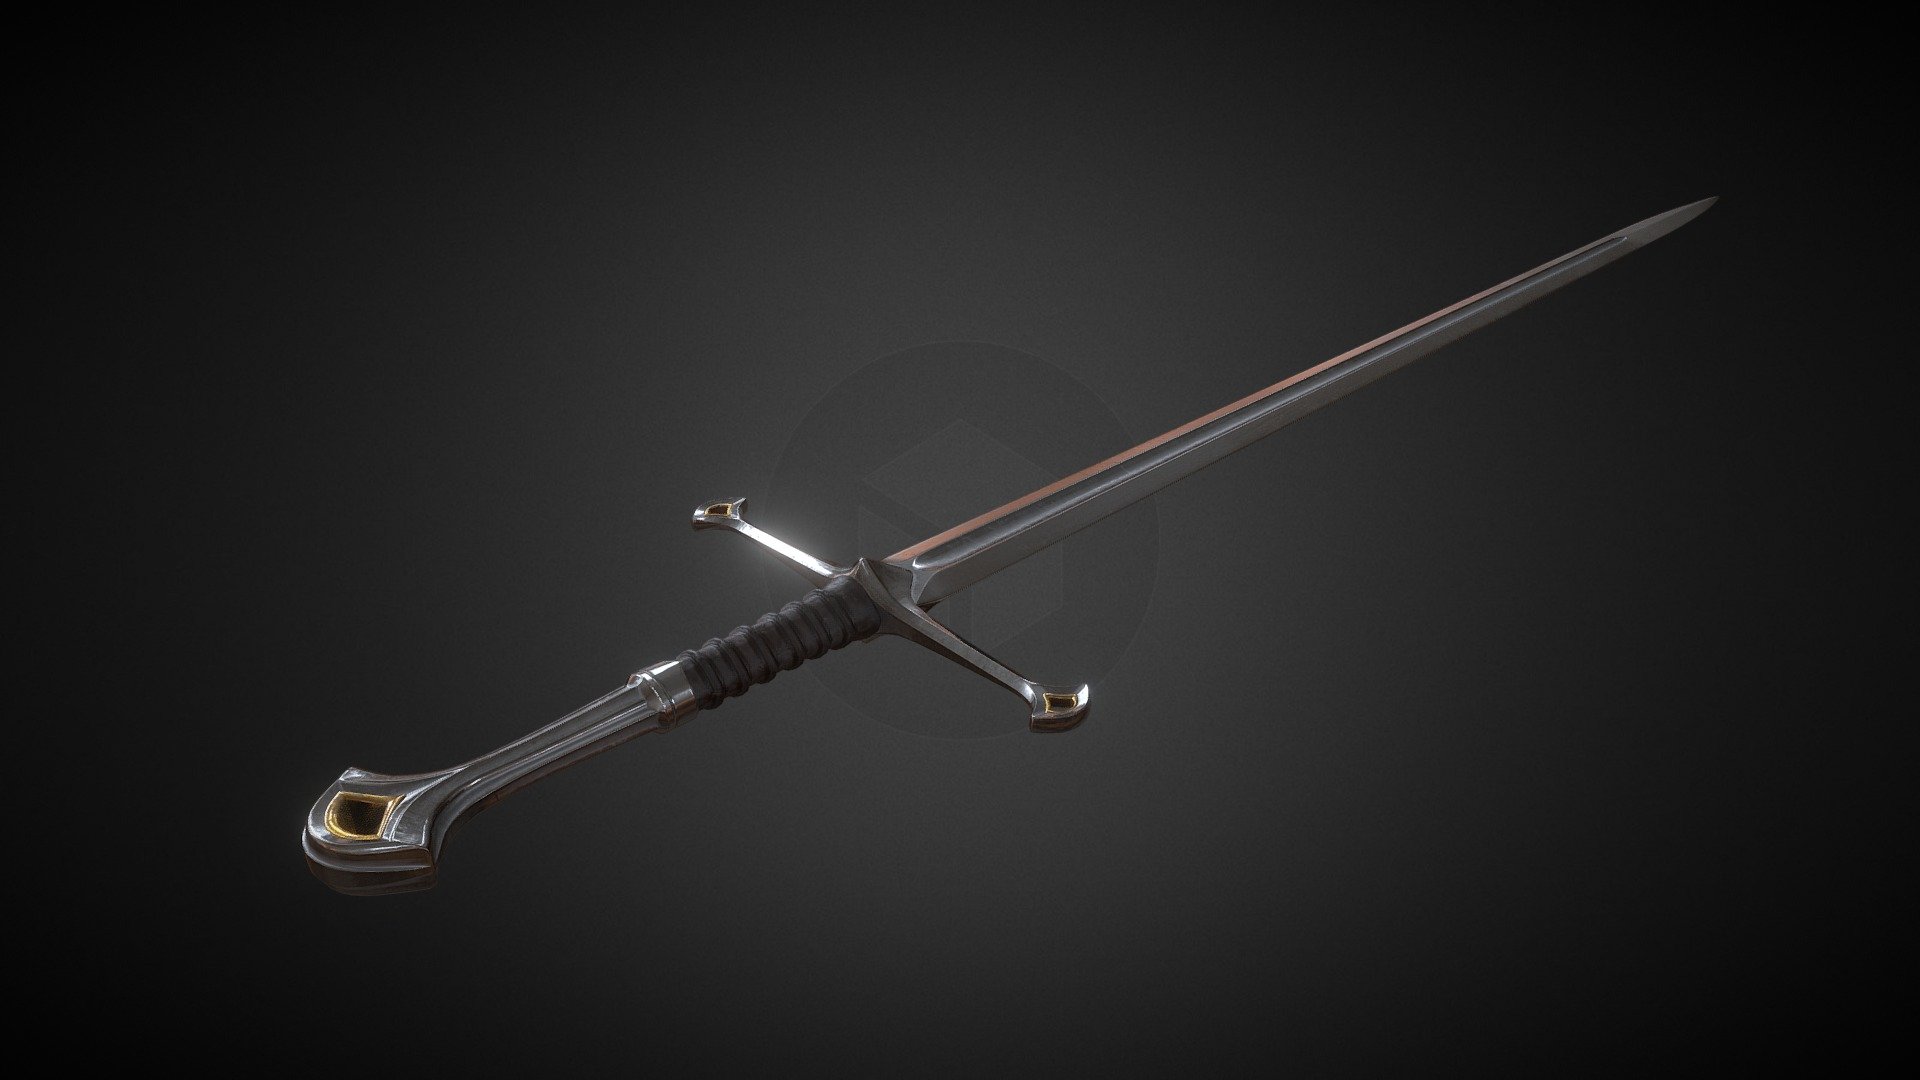 the-sword-of-aragorn-lord-of-rings-3d-model-by-egor69ok-2577e49